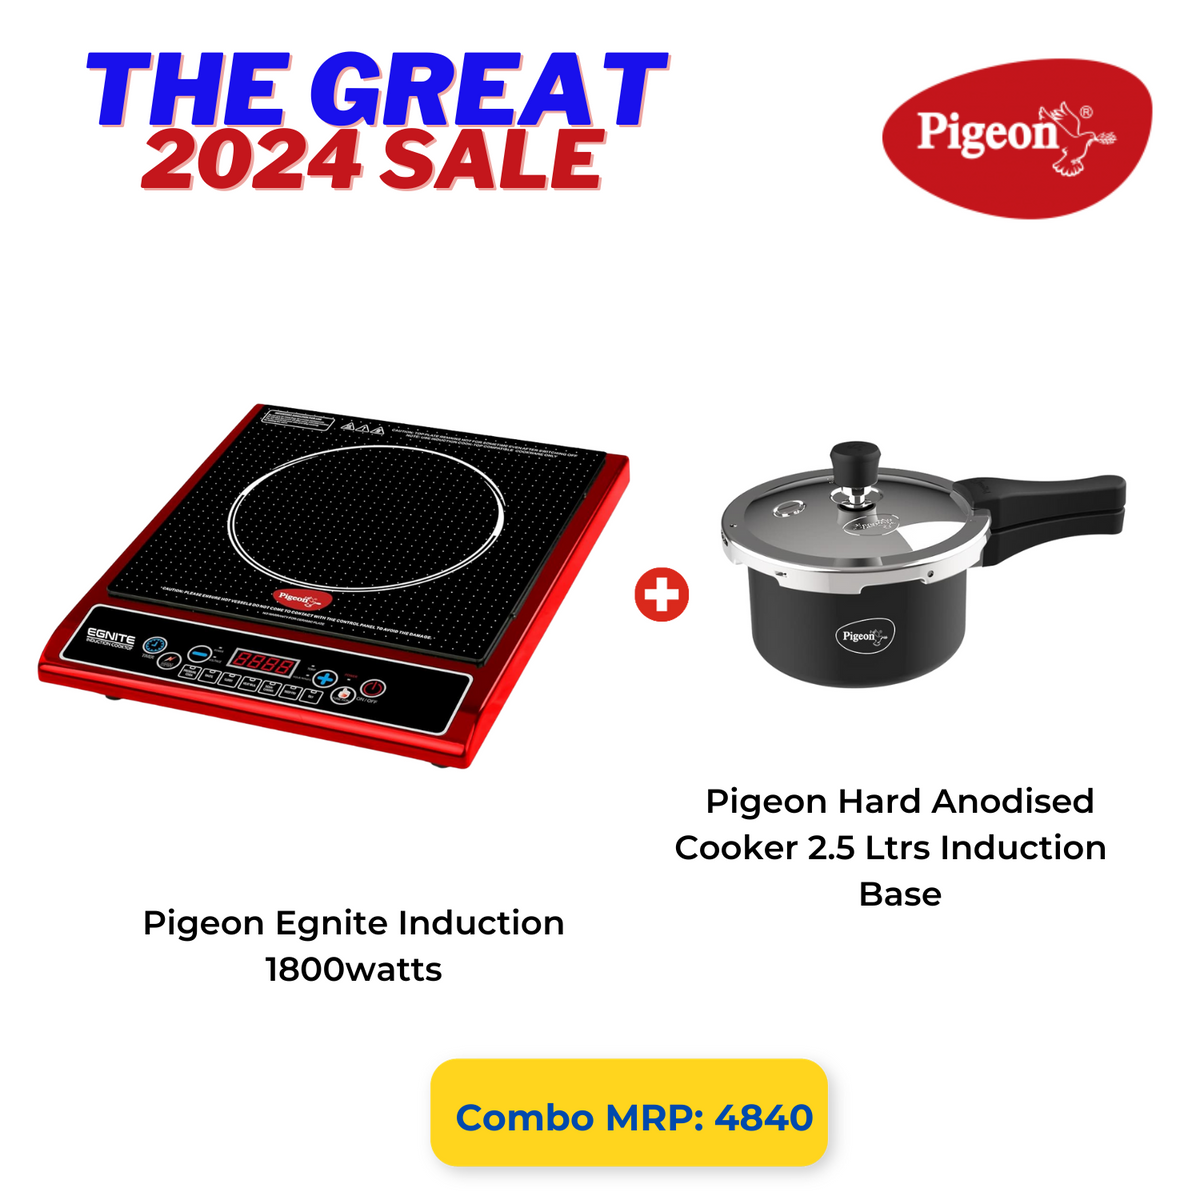 Pigeon The Great 2024 Sale: Egnite 1800W Induction Cooktop + 2.5L Titan Hard Anodised Cooker 🌟🎁 - Limited Stock! 🏃‍♂️💨